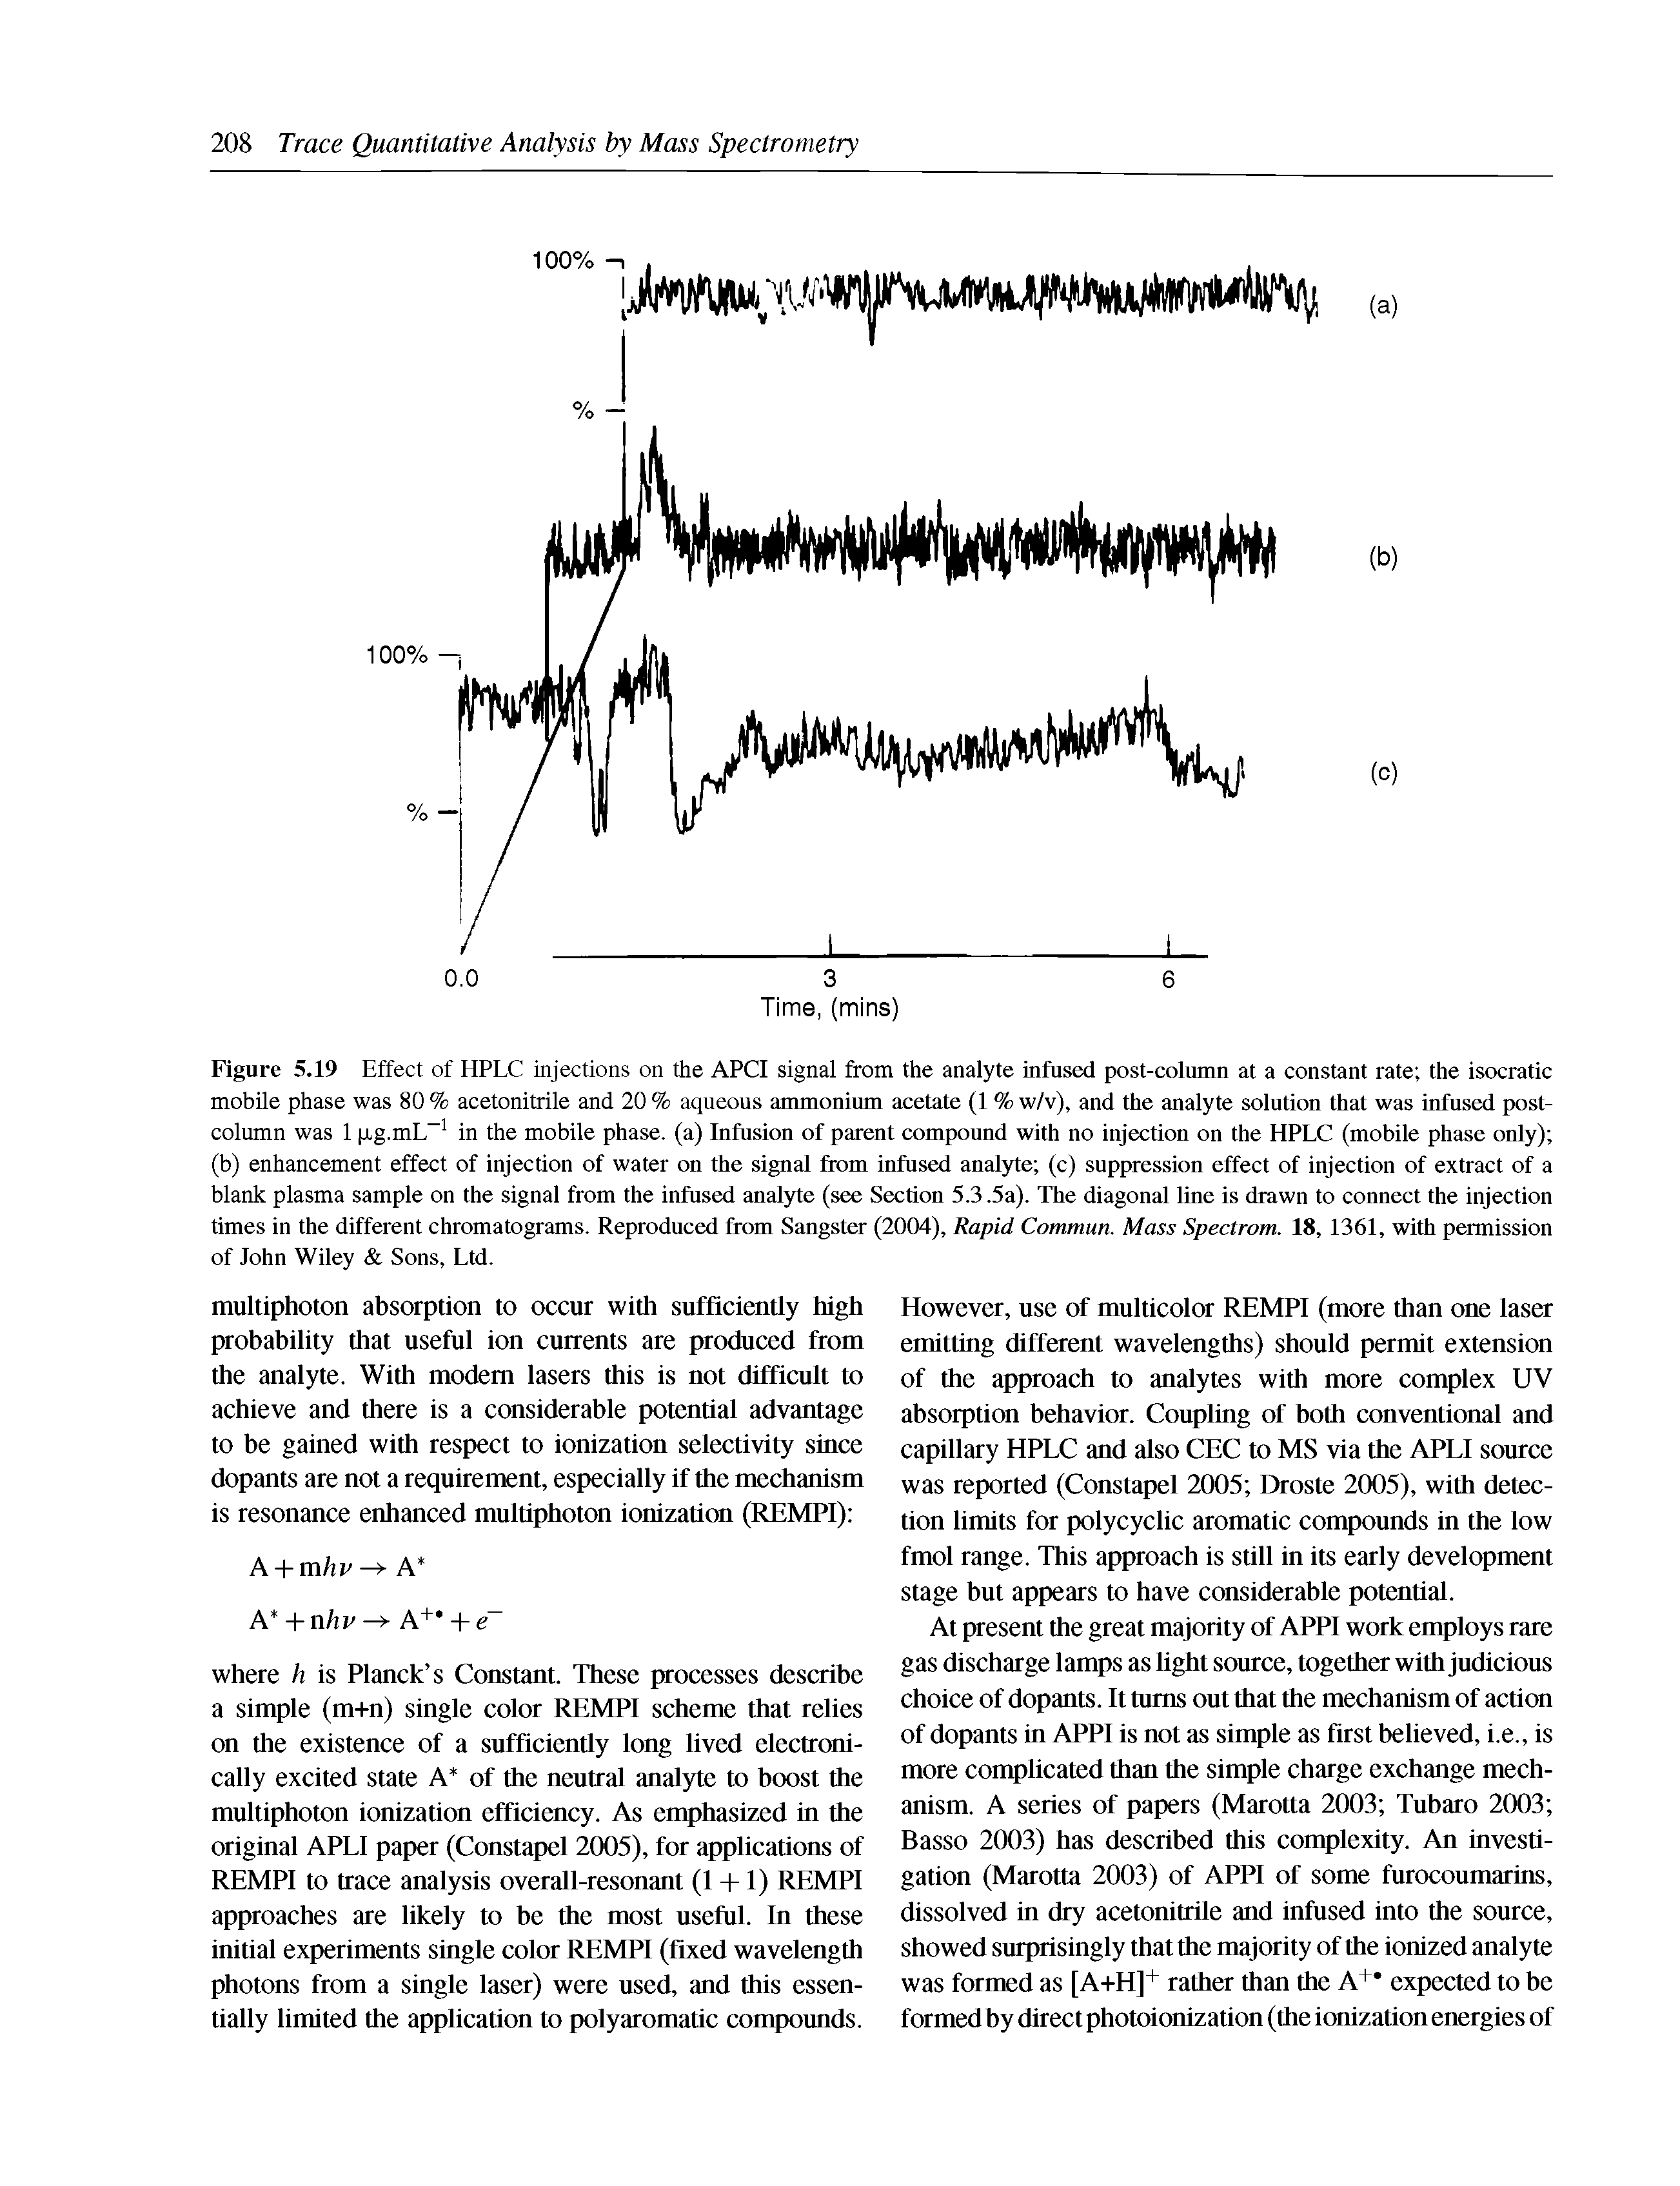 Figure 5.19 Effect of HPLC injections on the APCI signal from the analyte infused post-column at a constant rate the isocratic mobile phase was 80 % acetonitrile and 20 % aqueous ammonium acetate (1 % w/v), and the analyte solution that was infused postcolumn was 1 p.g.mL in the mobile phase, (a) Infusion of parent compound with no injection on the HPLC (mobile phase only) (b) enhancement effect of injection of water on the signal from infused analyte (c) suppression effect of injection of extract of a blank plasma sample on the signal from the infused analyte (see Section 5.3.5a). The diagonal line is drawn to connect the injection times in the different chromatograms. Reproduced from Sangster (2004), Rapid Commun. Mass Spectrom. 18, 1361, with permission of John Wiley Sons, Ltd.